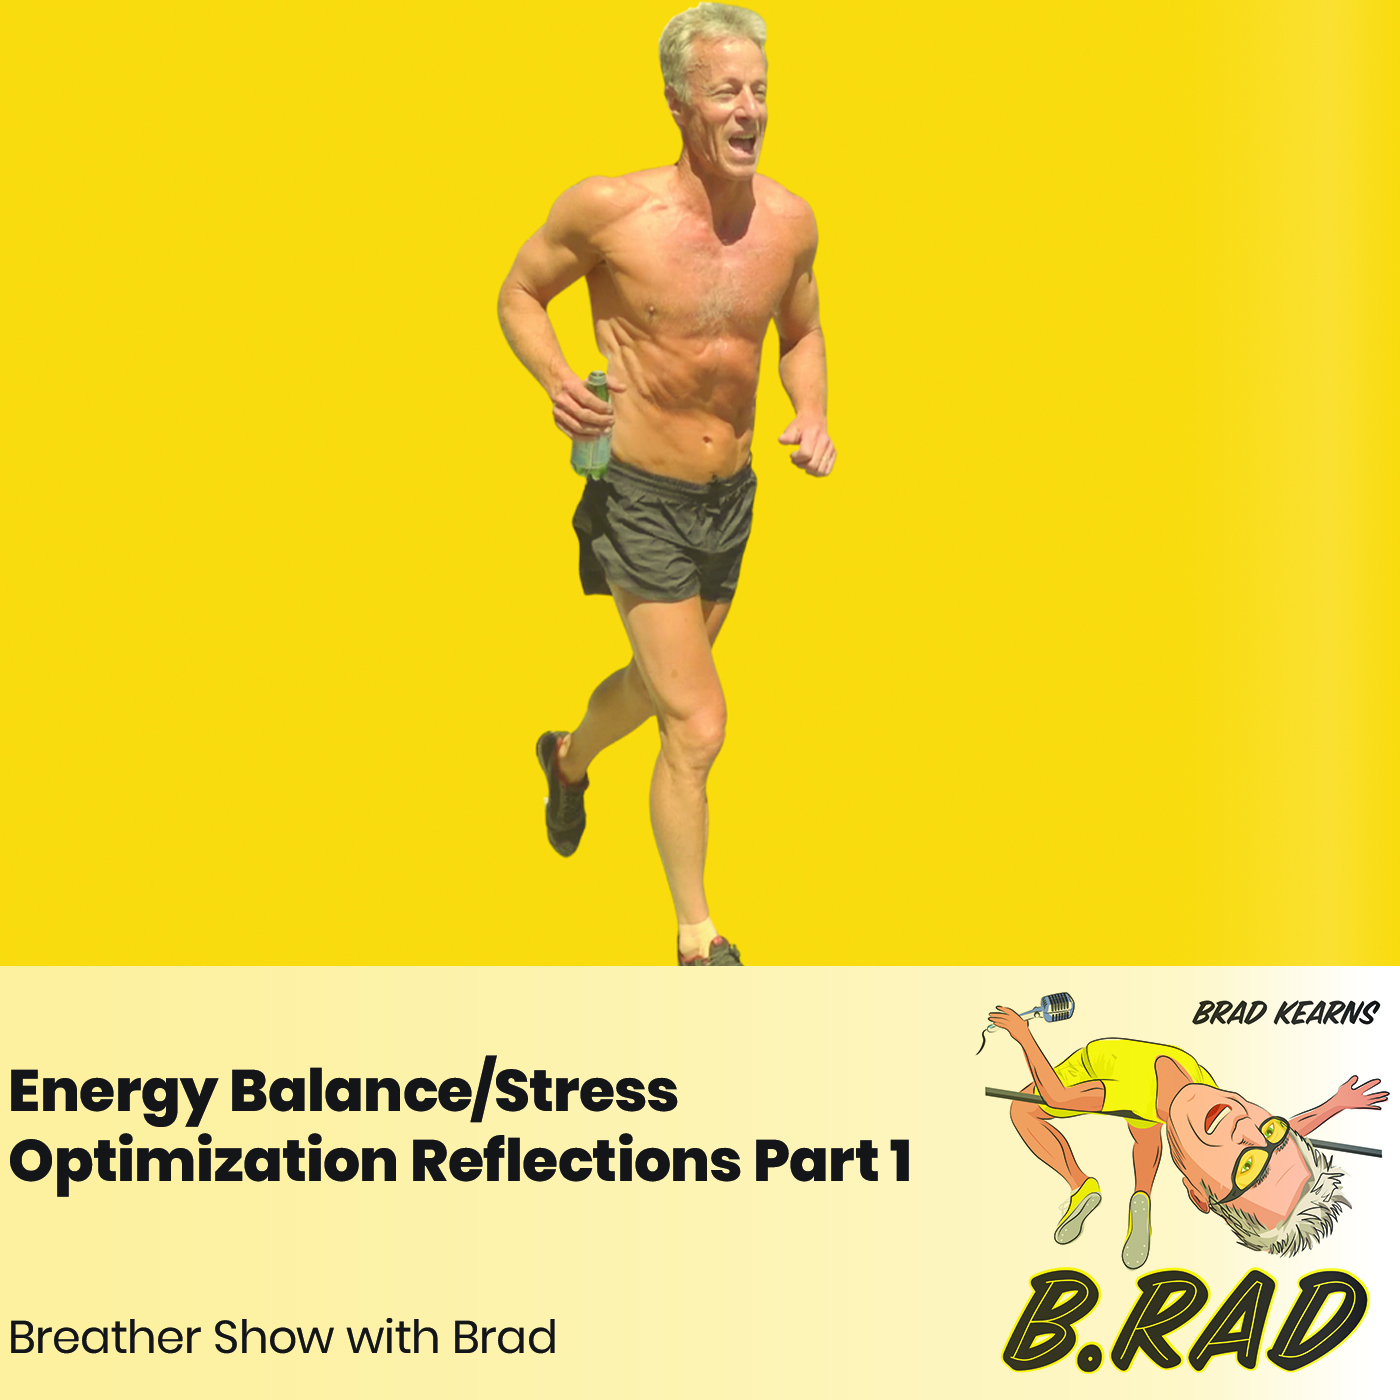 Energy Balance/Stress Optimization Reflections, Part 1: Could Popular Hormetic Stressors Like Fasting And Intense Exercise Be Too Stressful? (And Could Calling Out Liver King Draw In More Listeners? (Breather Episode with Brad)